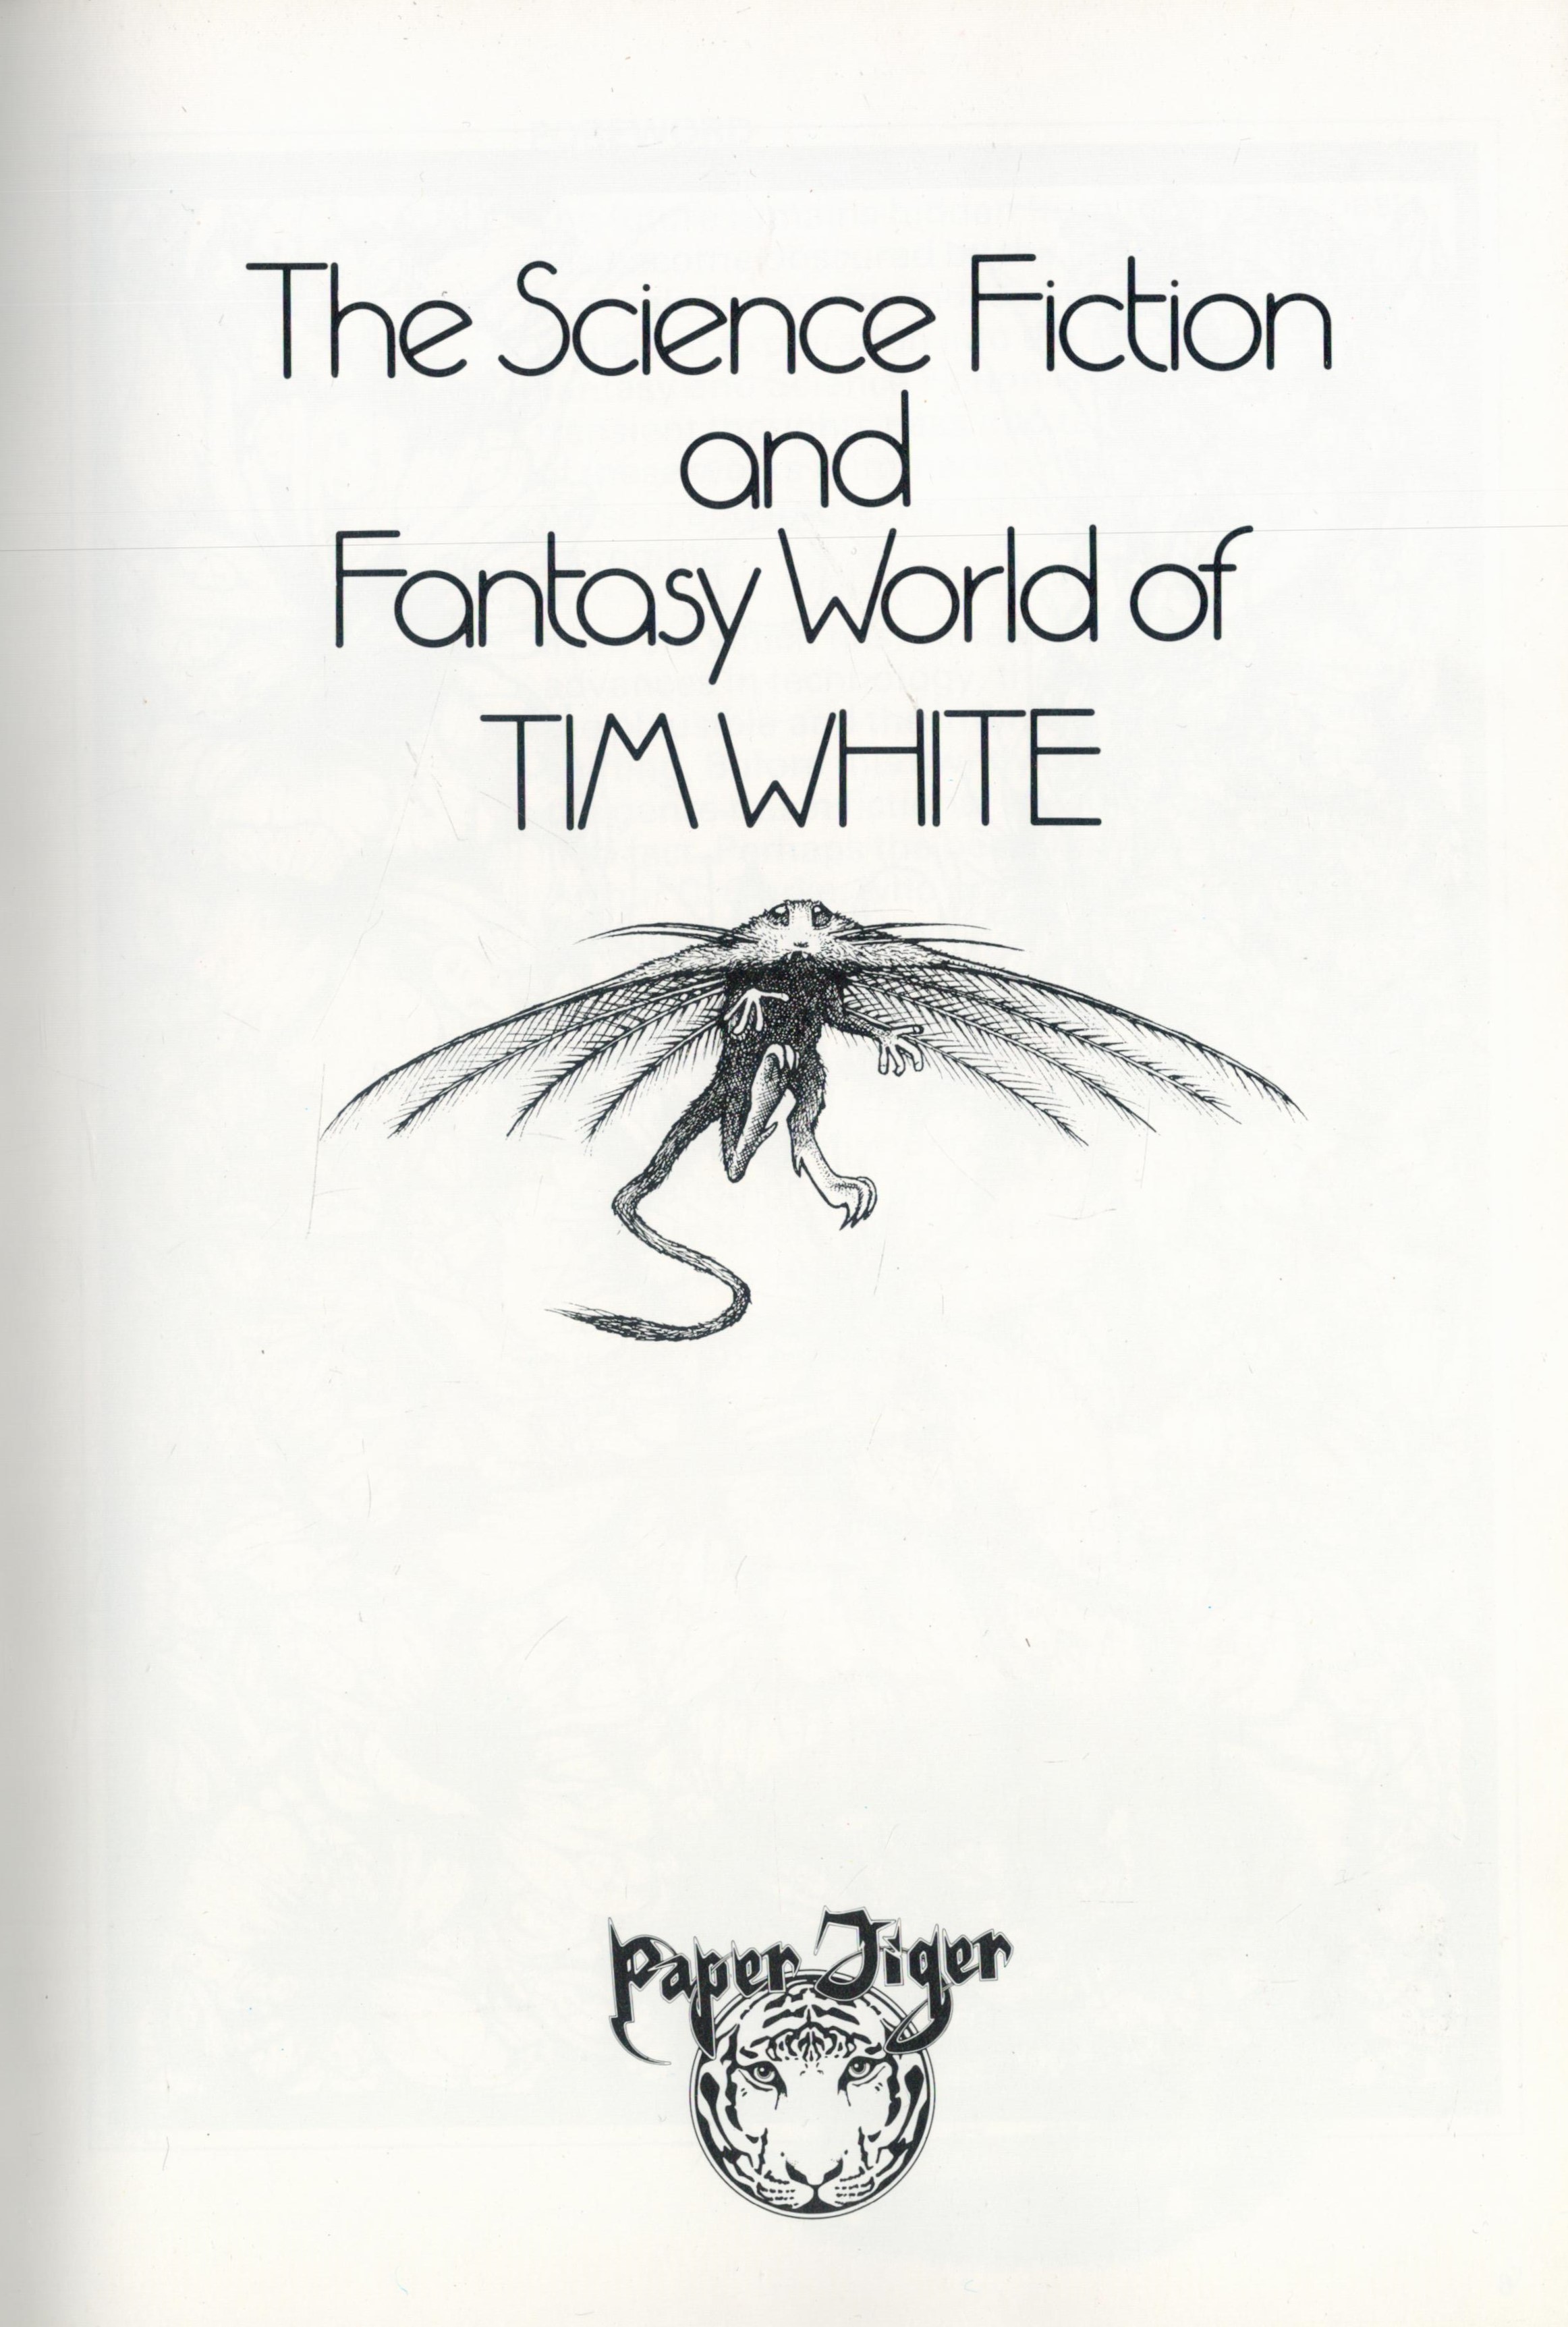 The Science Fiction and Fantasy World of Tim White 1981 First Edition Hardback Book with 143 pages - Image 2 of 3